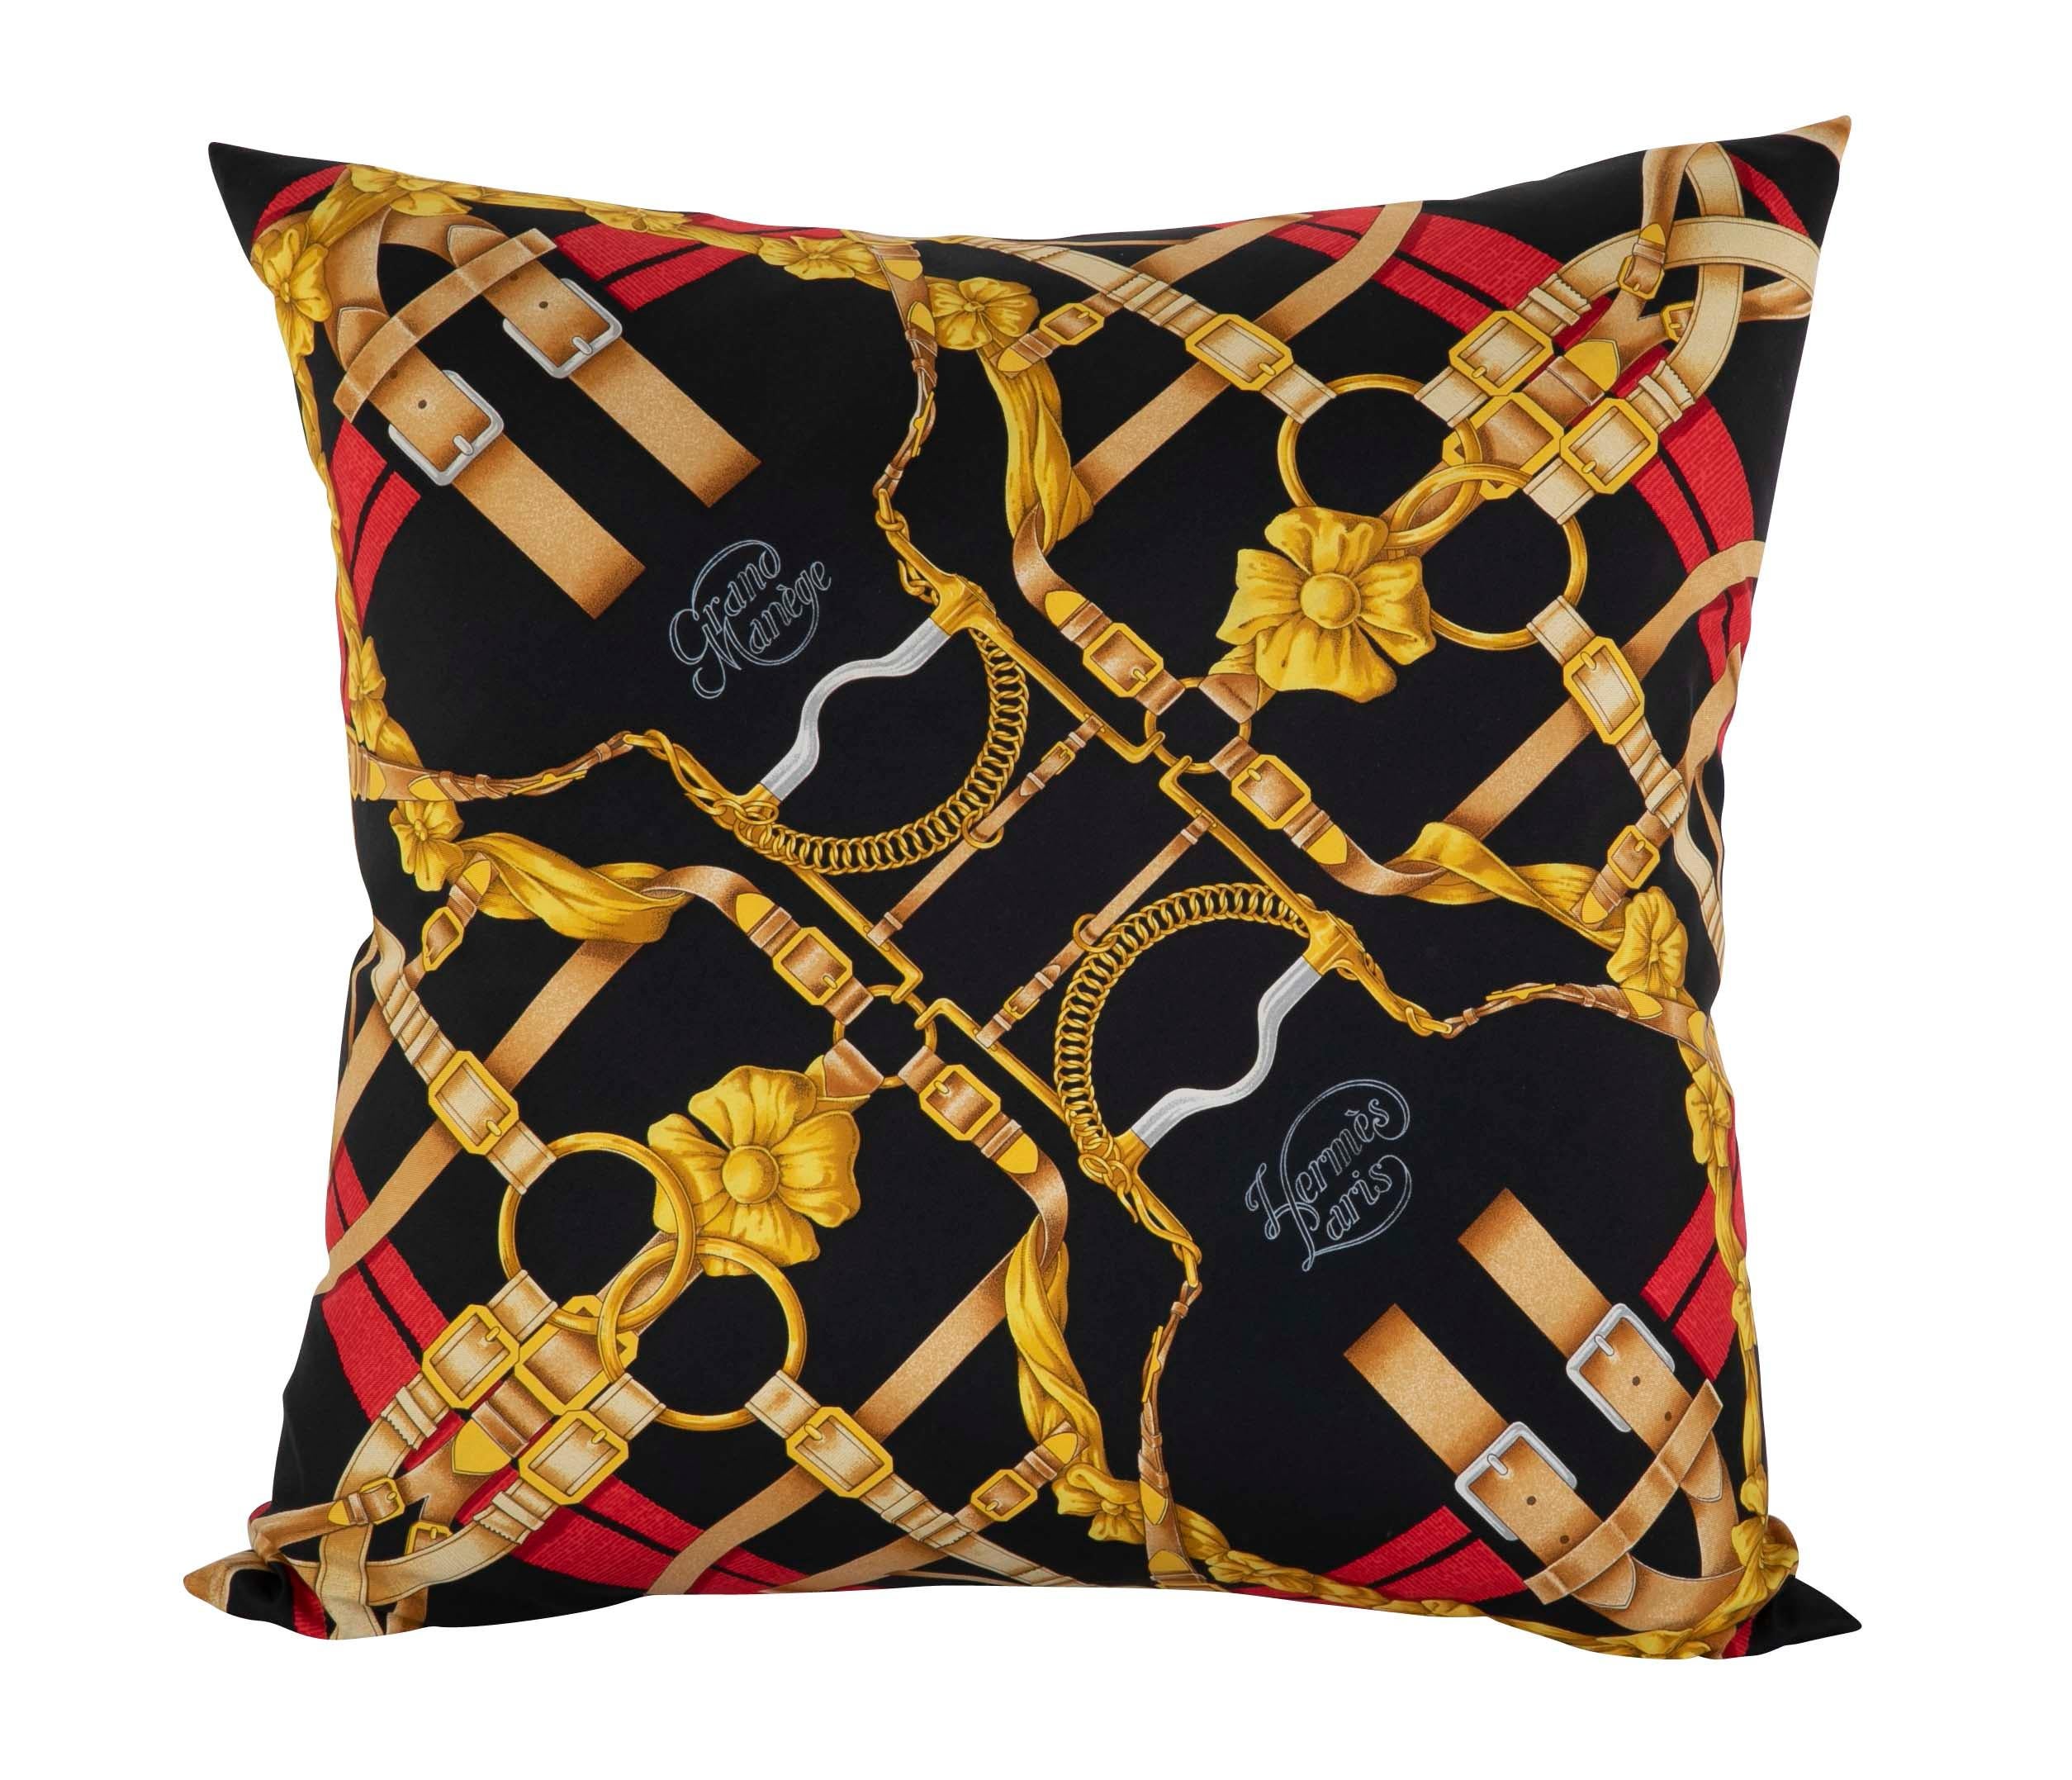 Contemporary Collection of Vintage Hermes Silk Pillows by Various Designers